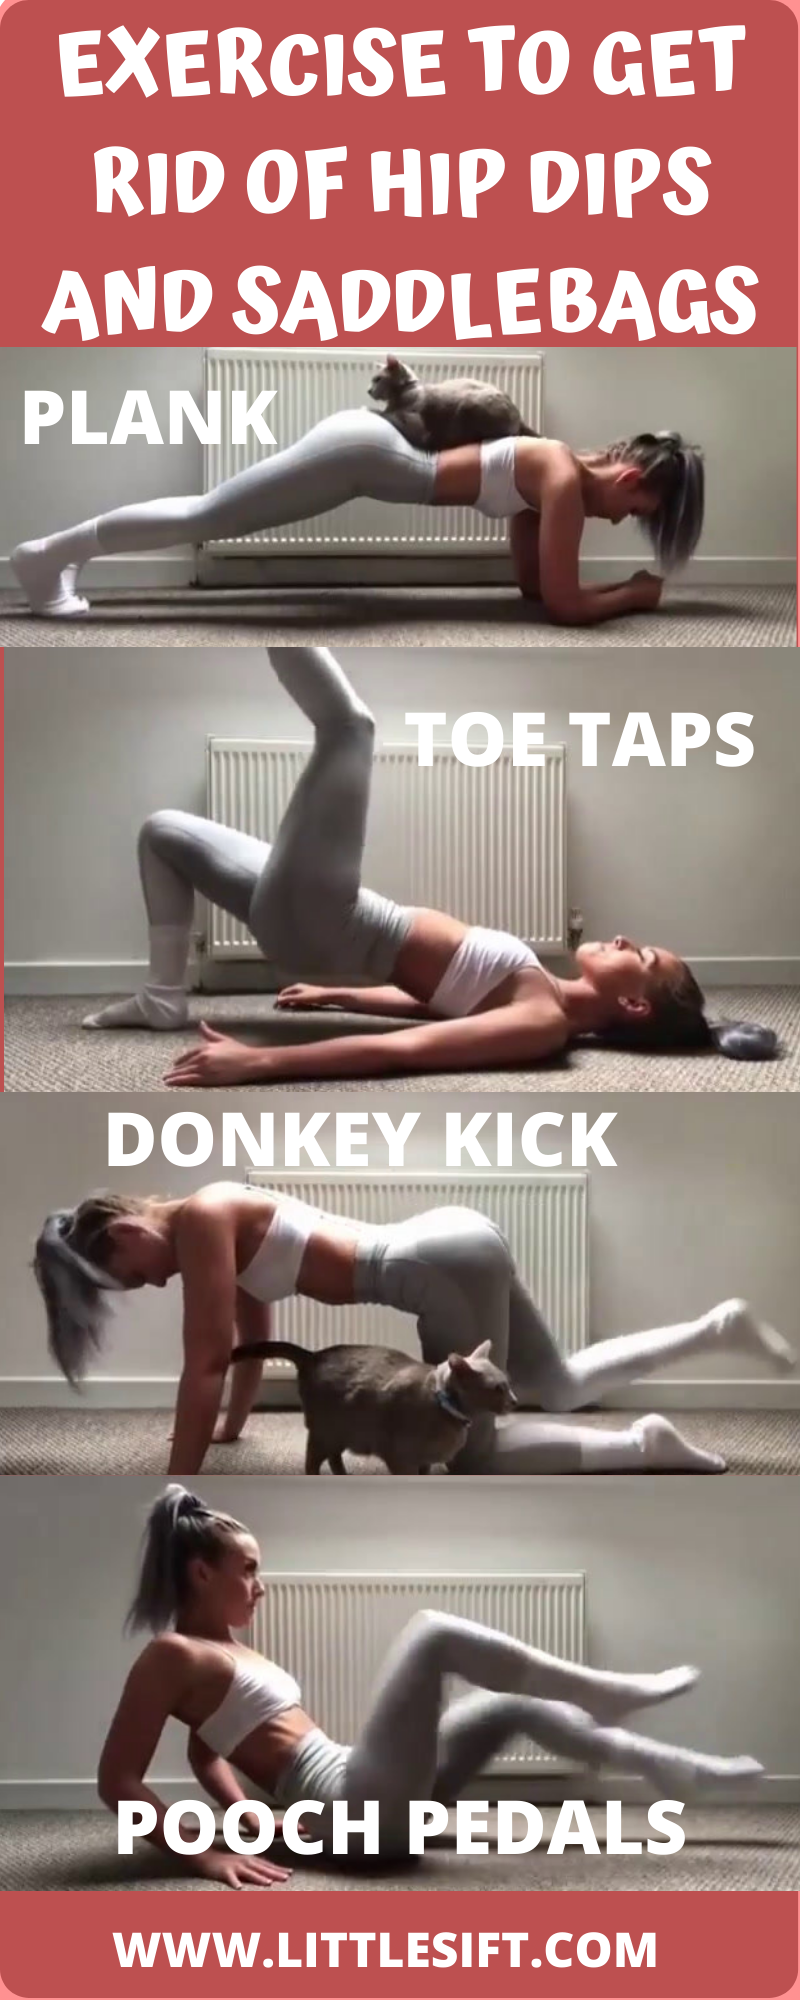 EXERCISE TO FIX HIP DIPS AND SADDLEBAGS -   19 how to get rid of hip dips ideas